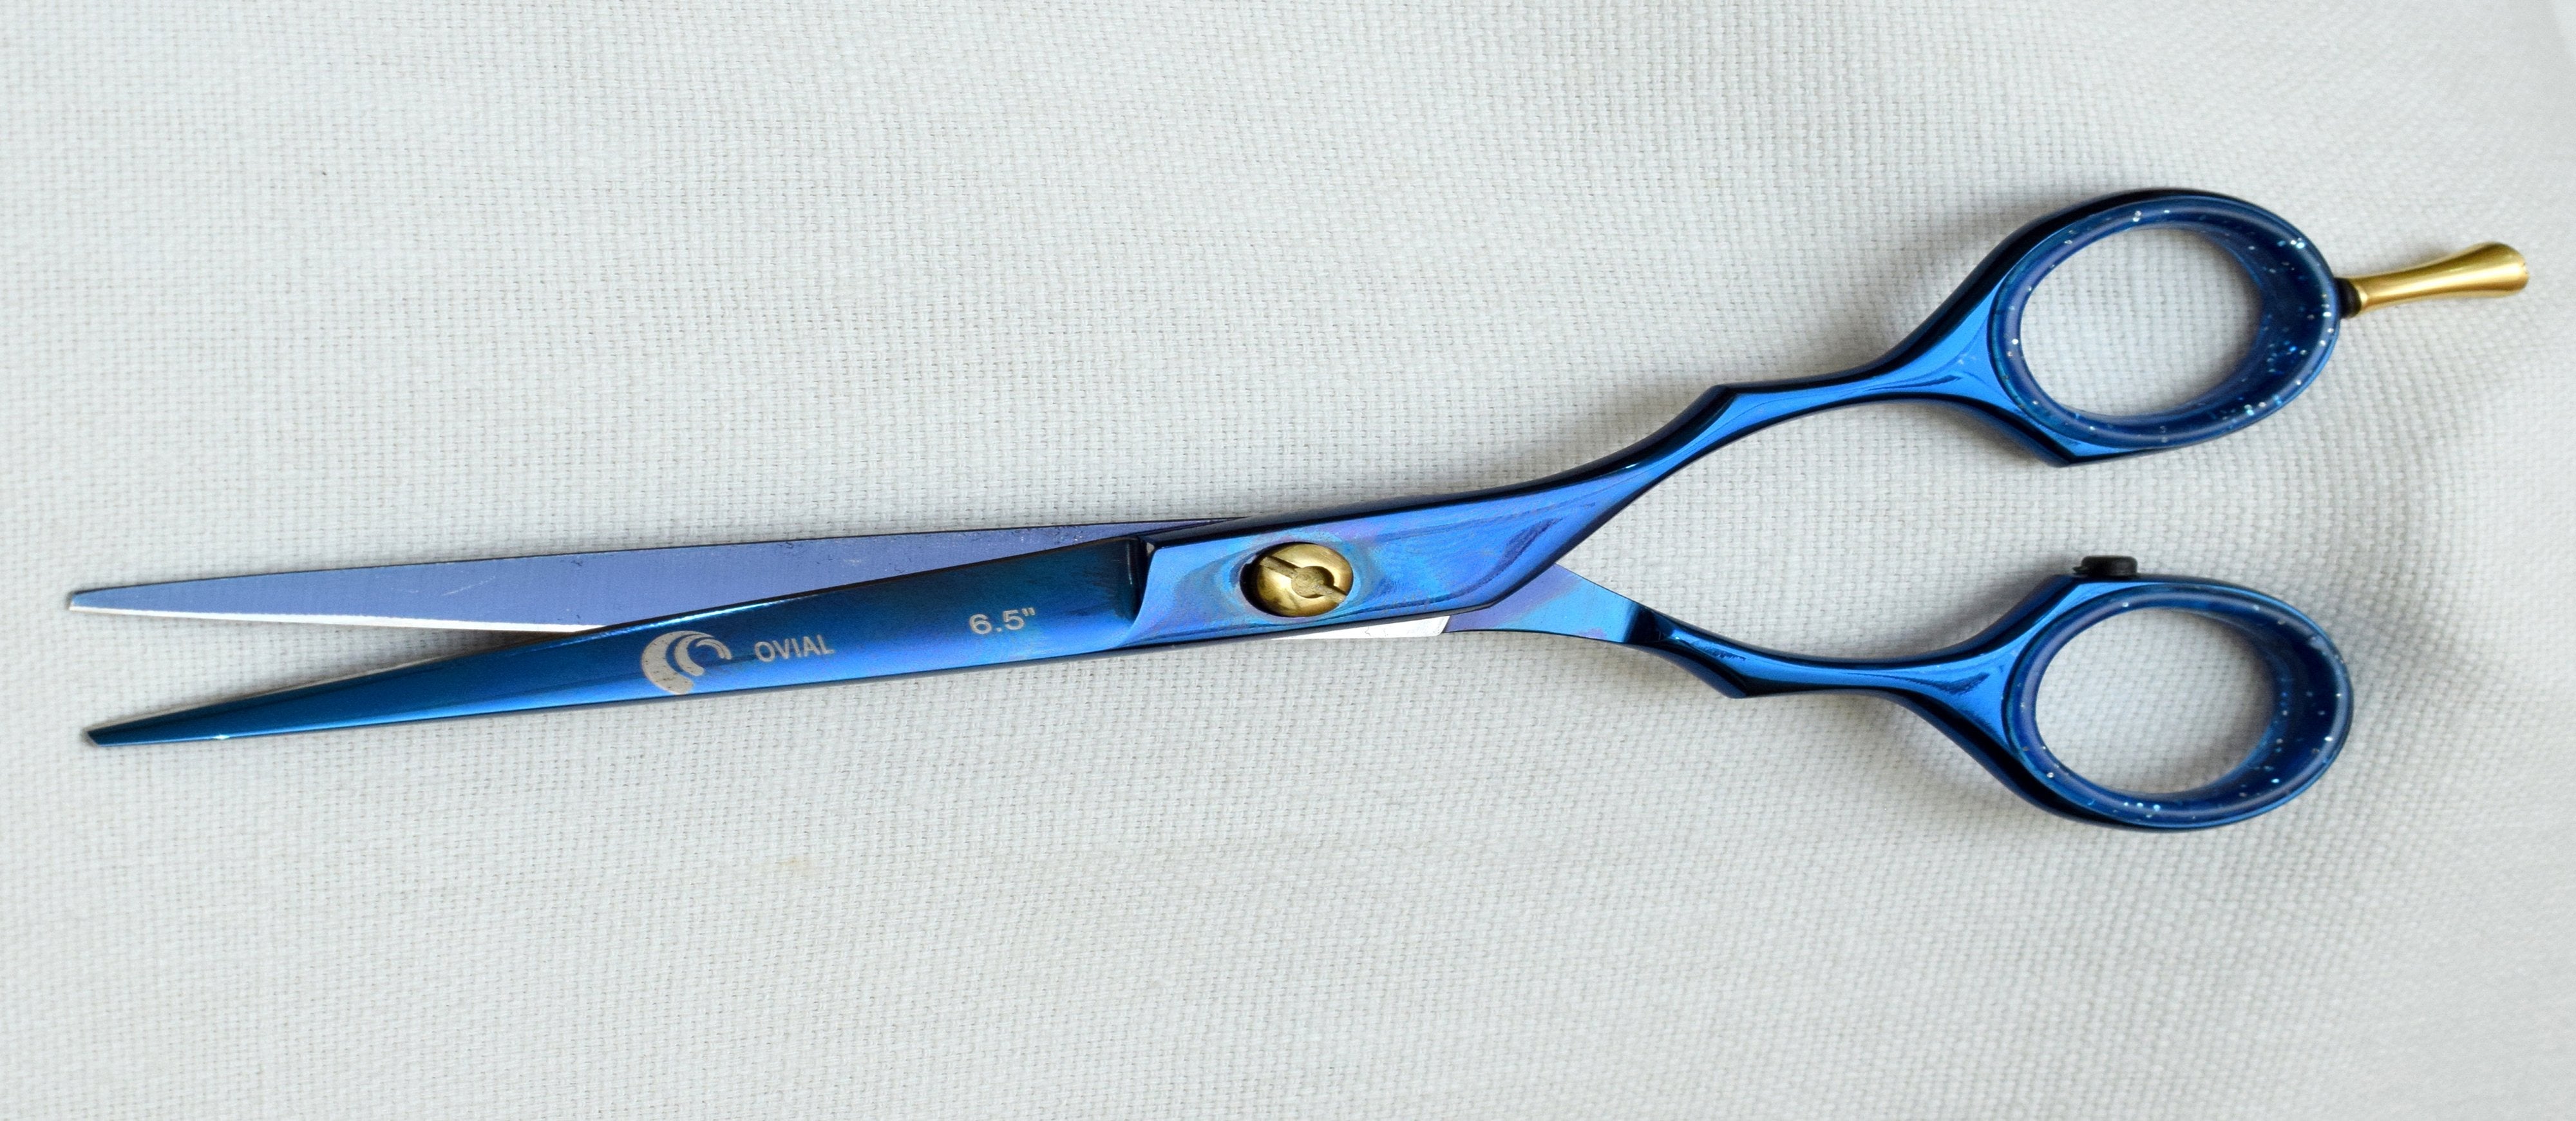 Ovial Alexander- Blue Plasma Quoted Stainless Steel Professional Scissor 6.5"